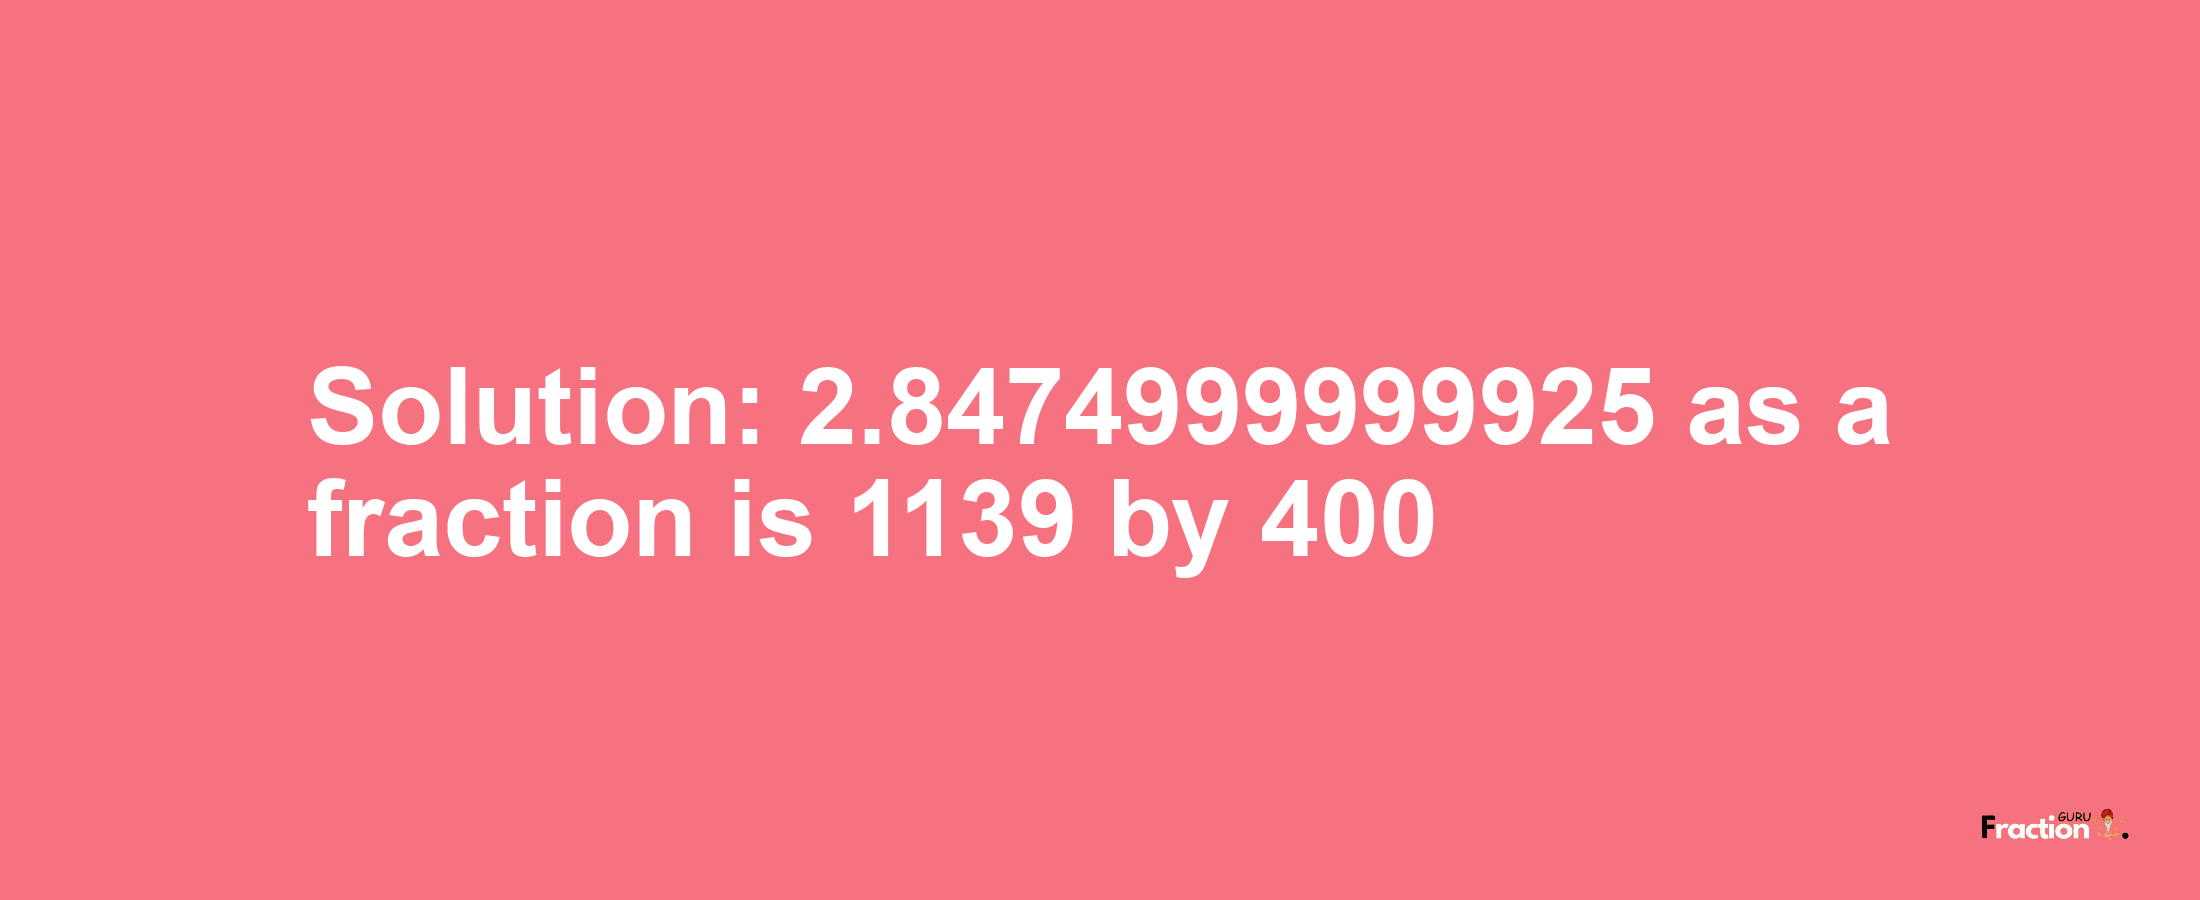 Solution:2.8474999999925 as a fraction is 1139/400